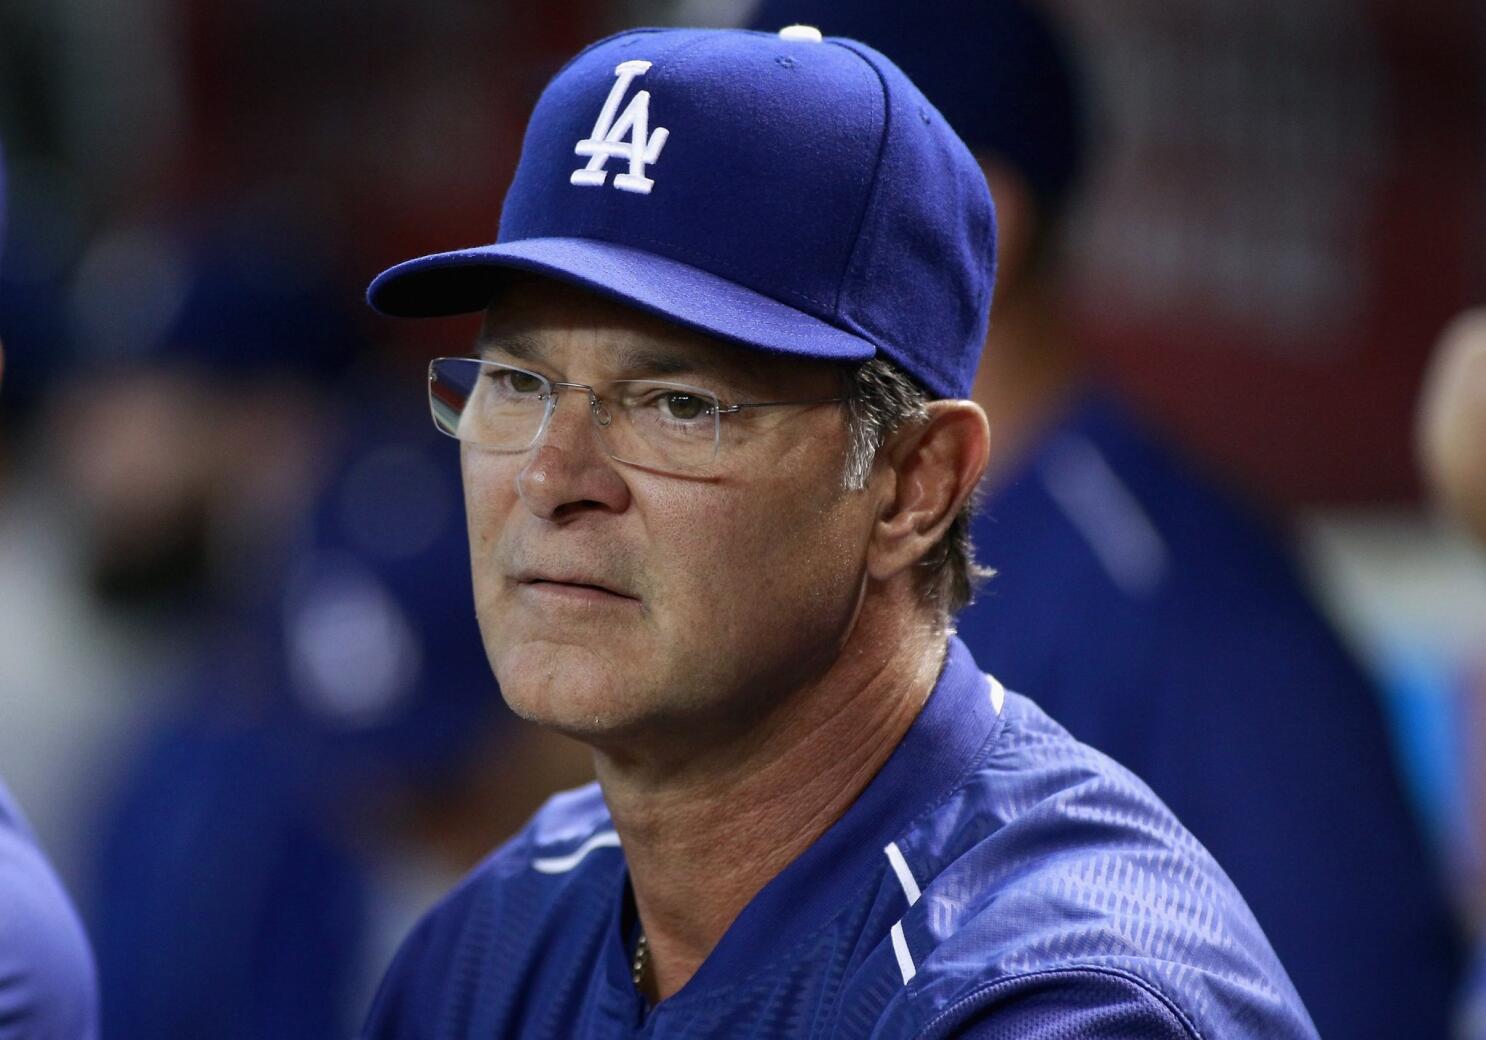 Hall candidate: Mattingly was great for too short a time